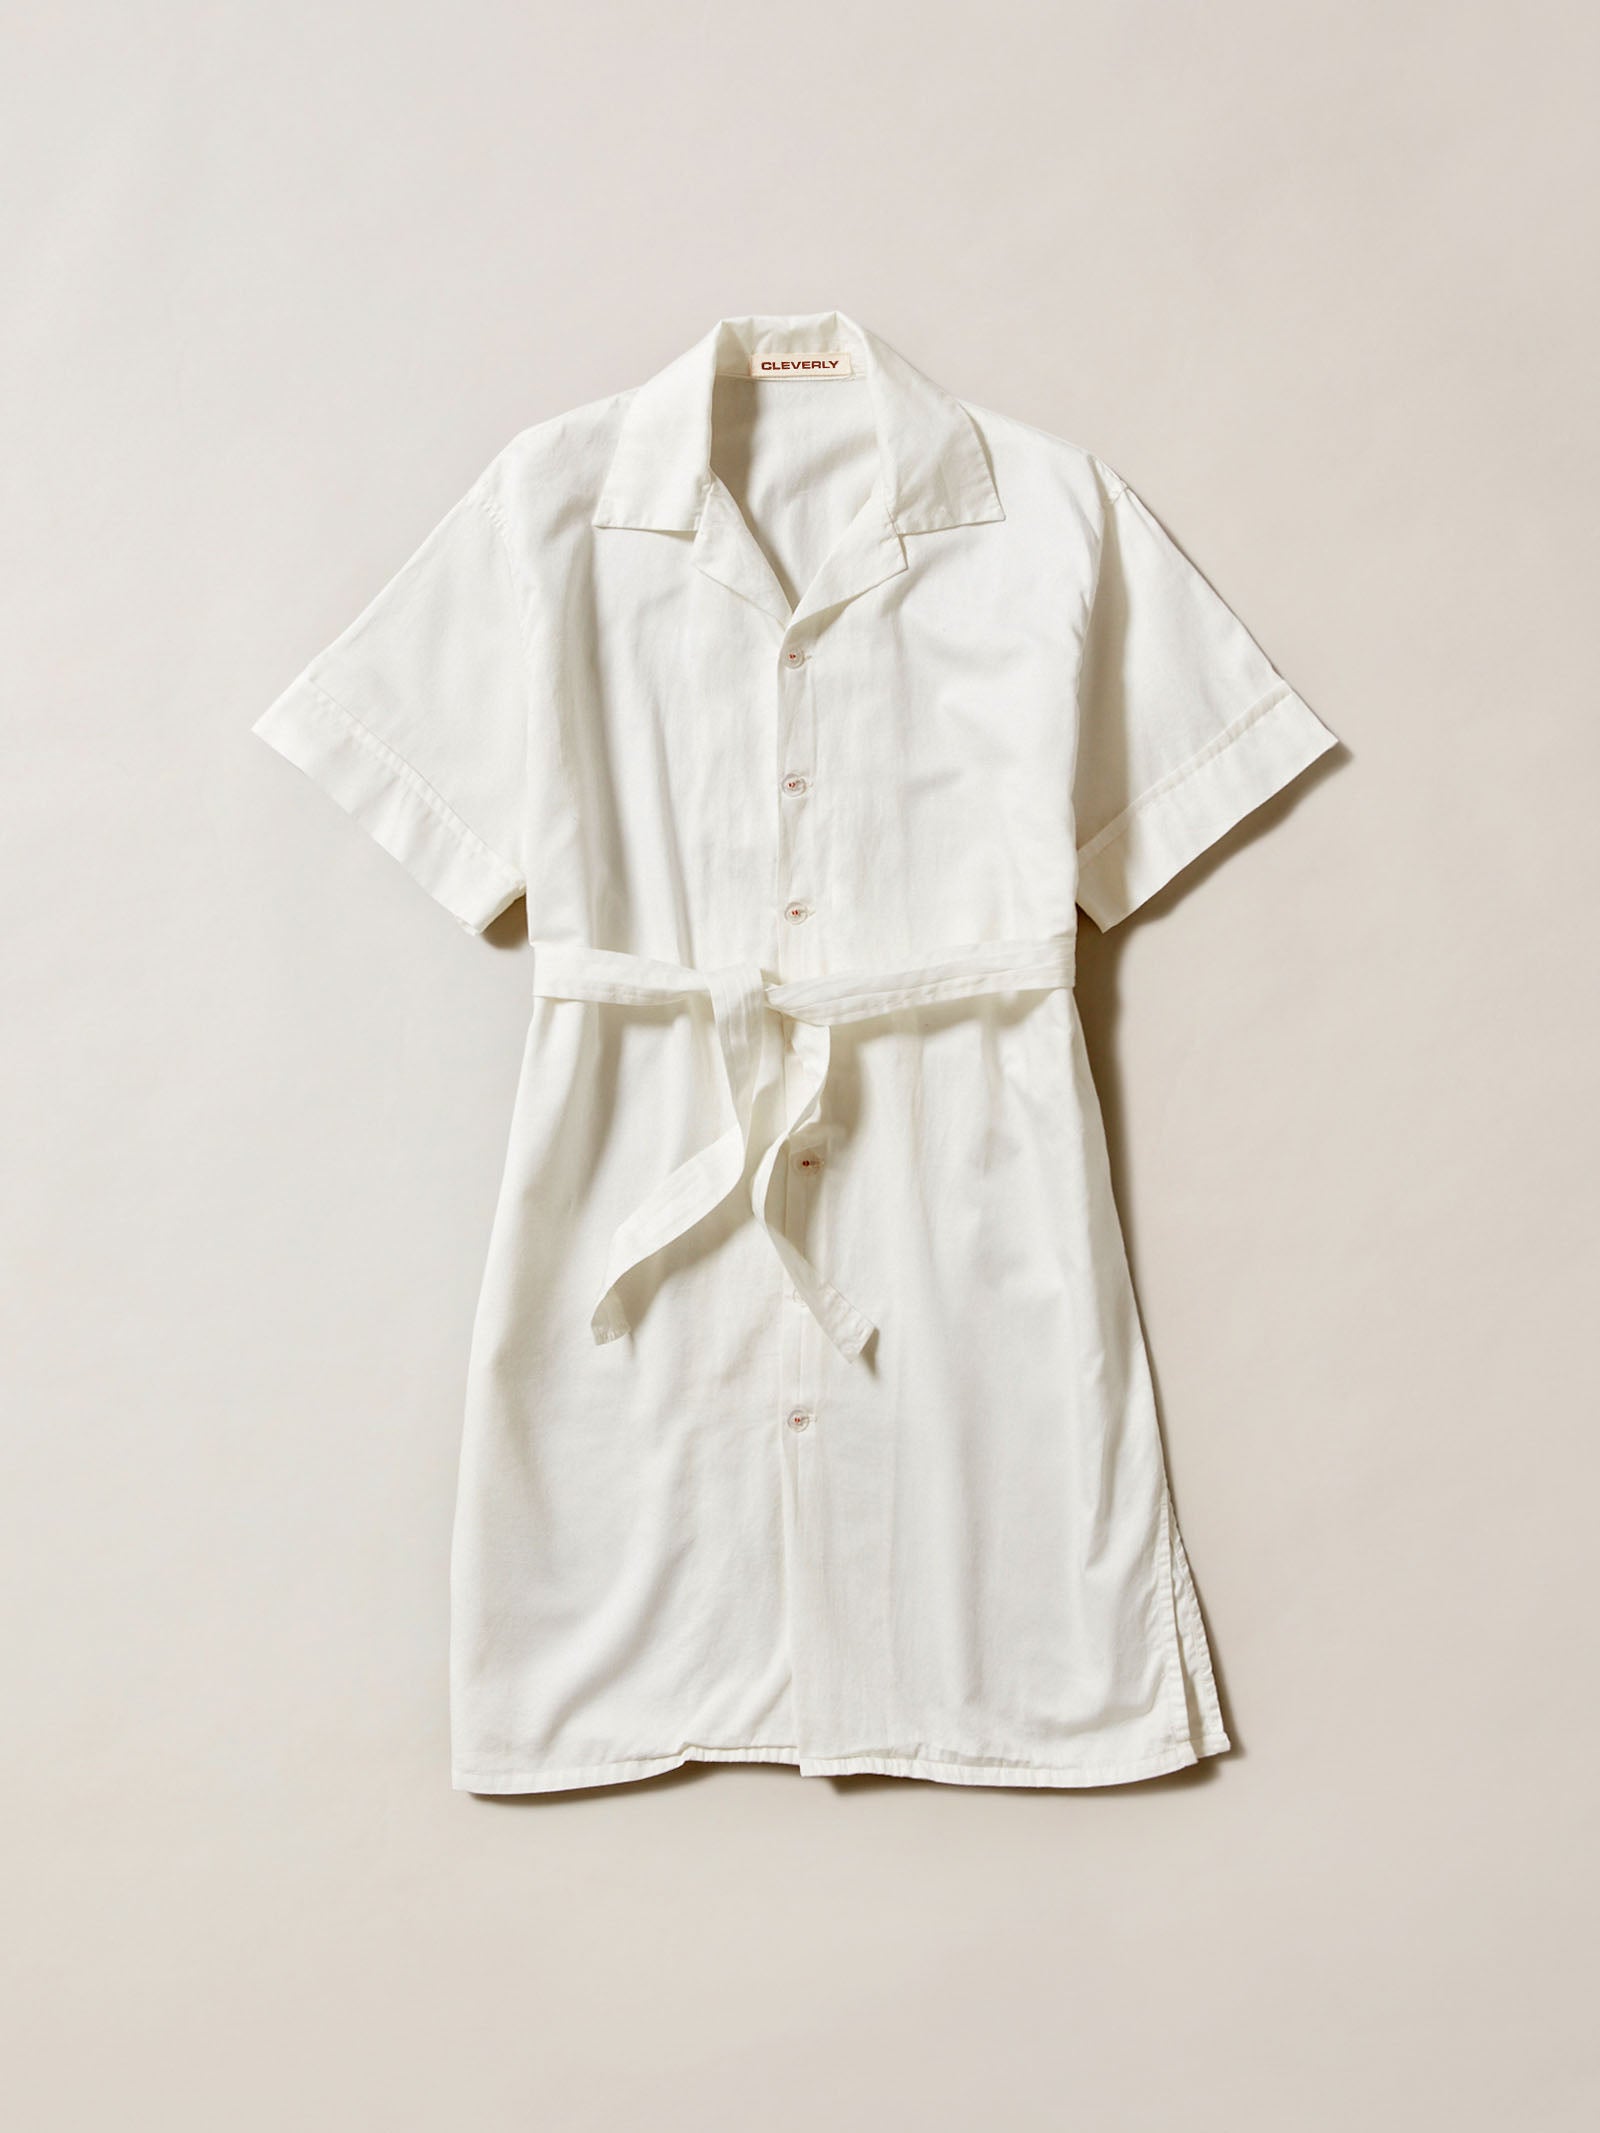 100% cotton, white button down shirt dress, casual dress or luxury cotton nightwear, short sleeves and mid length